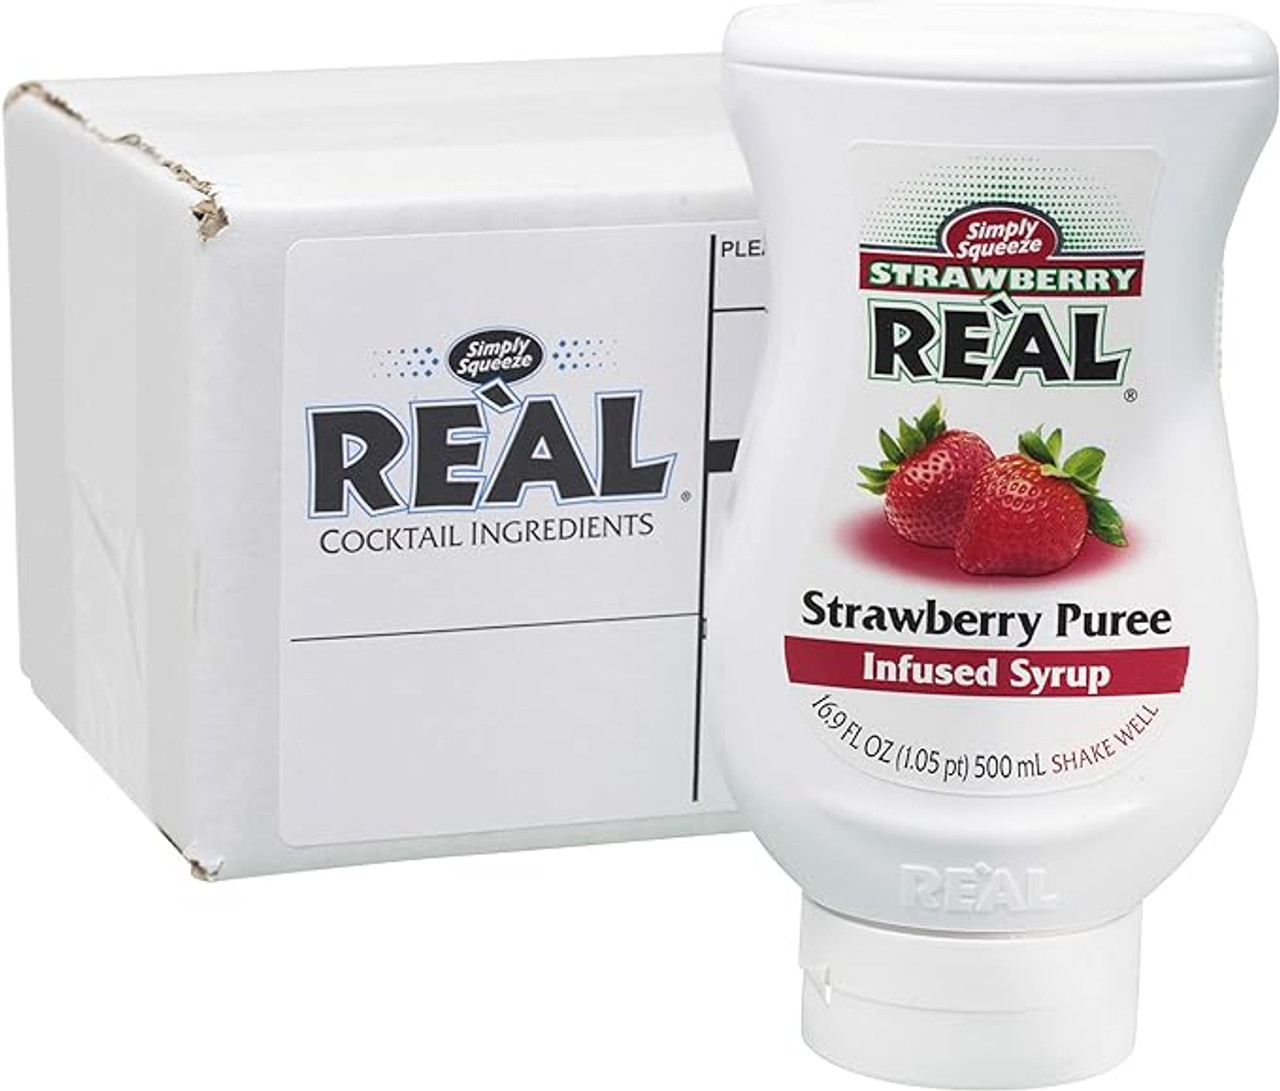 Real 16.9 fl. oz. Strawberry Puree Infused Syrup - Sweet Strawberry Flavor - Chicken Pieces